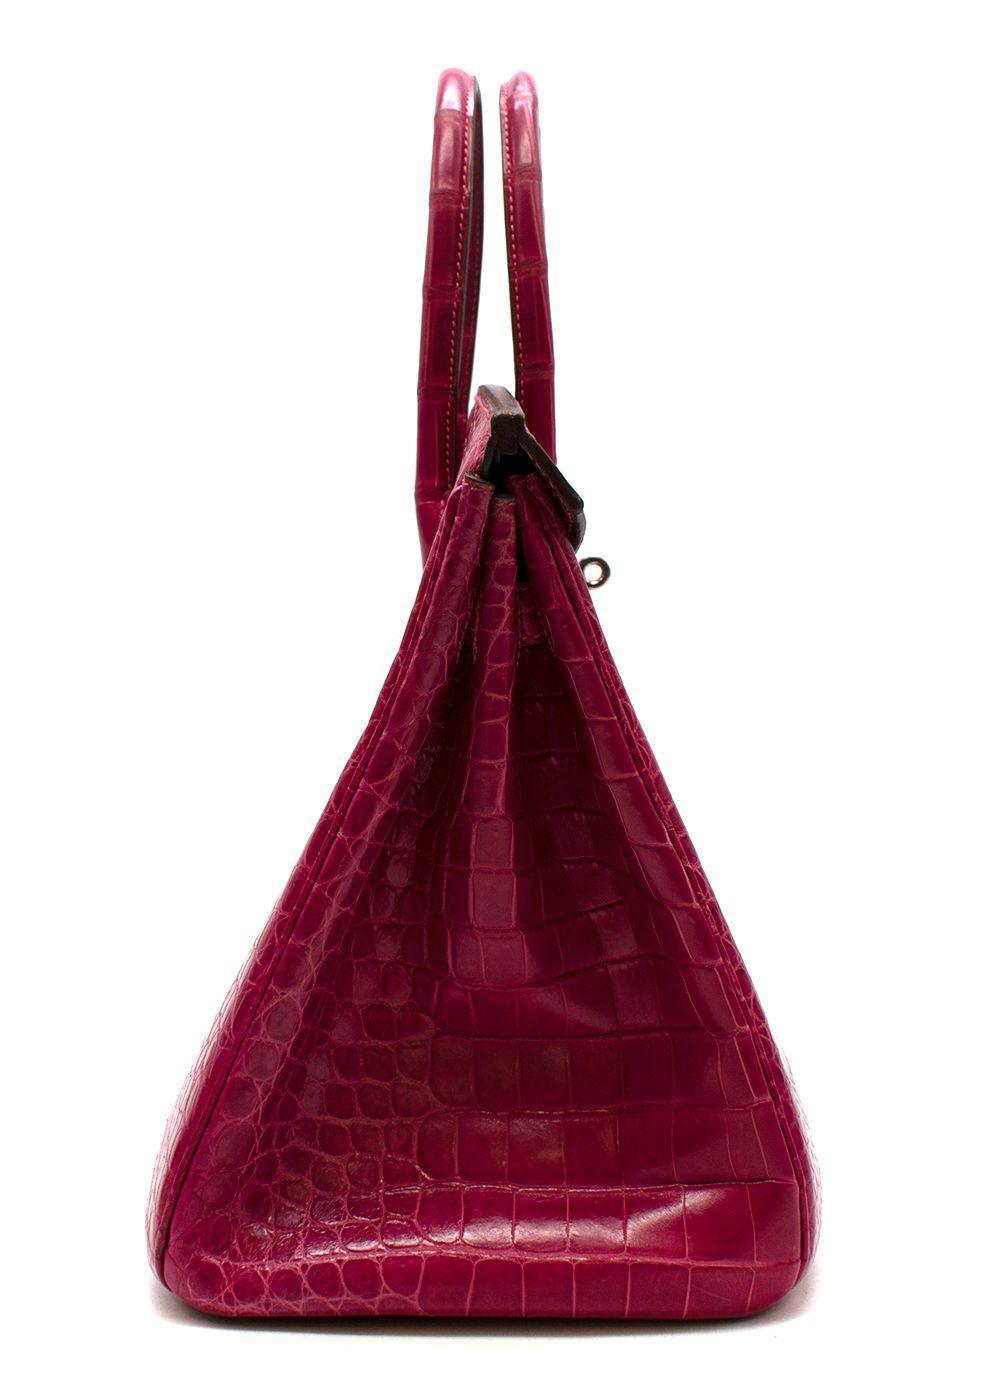 Hermes Fuchsia Shiny Porosus Crocodile Birkin 35 bag with palladium hardware. The bag has been
 to HERMES aftercare and the hardware has been replaced with new. The hardware is all sealed and
 the leather has been cleaned professionally from the